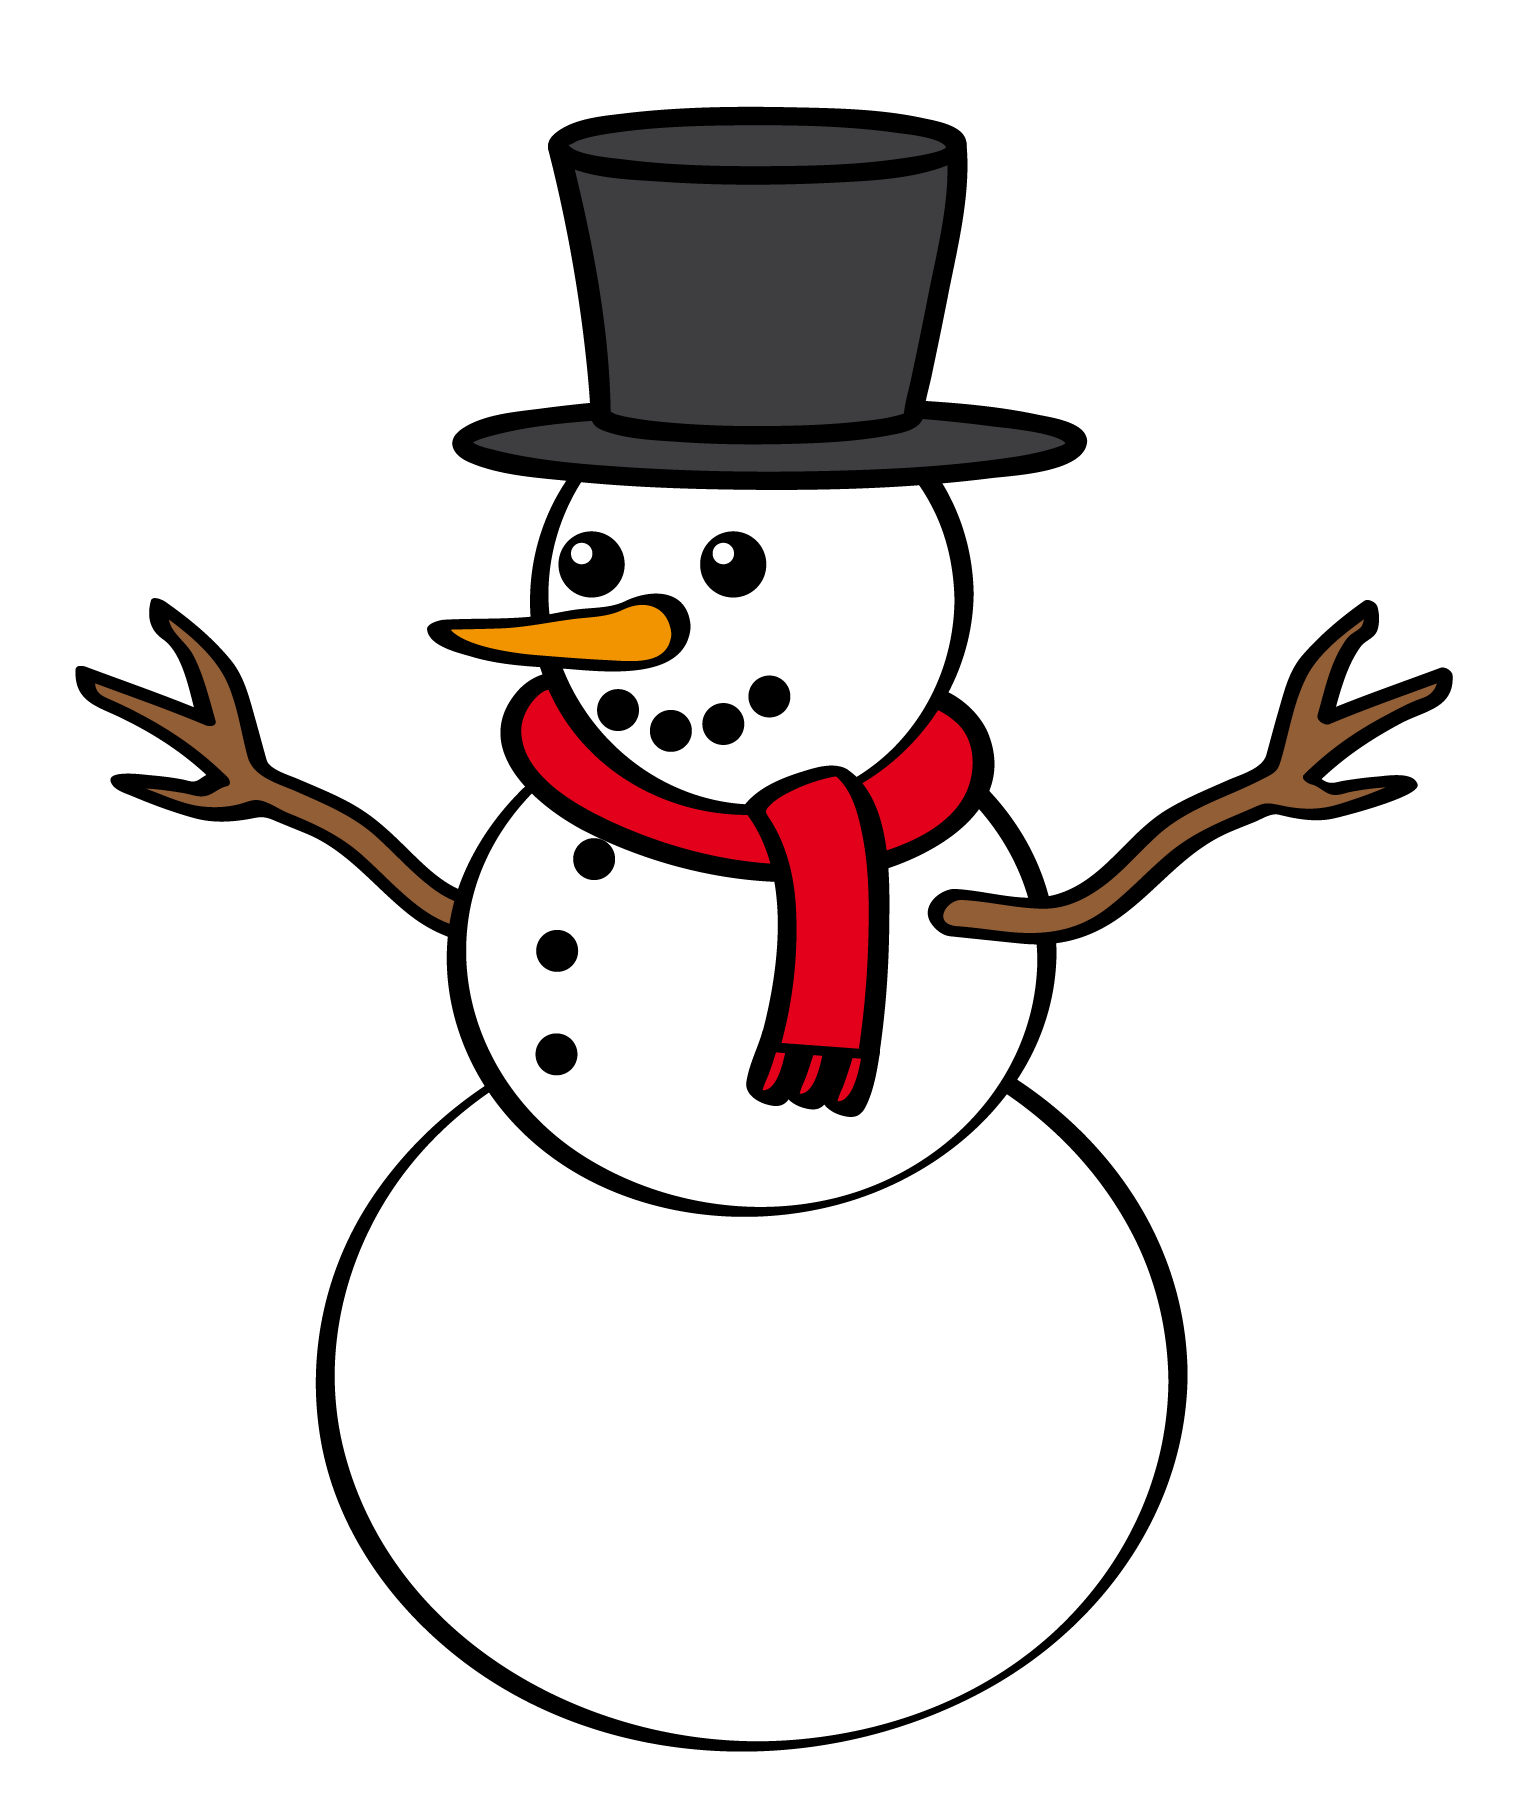 Detail Image Of A Snowman Nomer 5